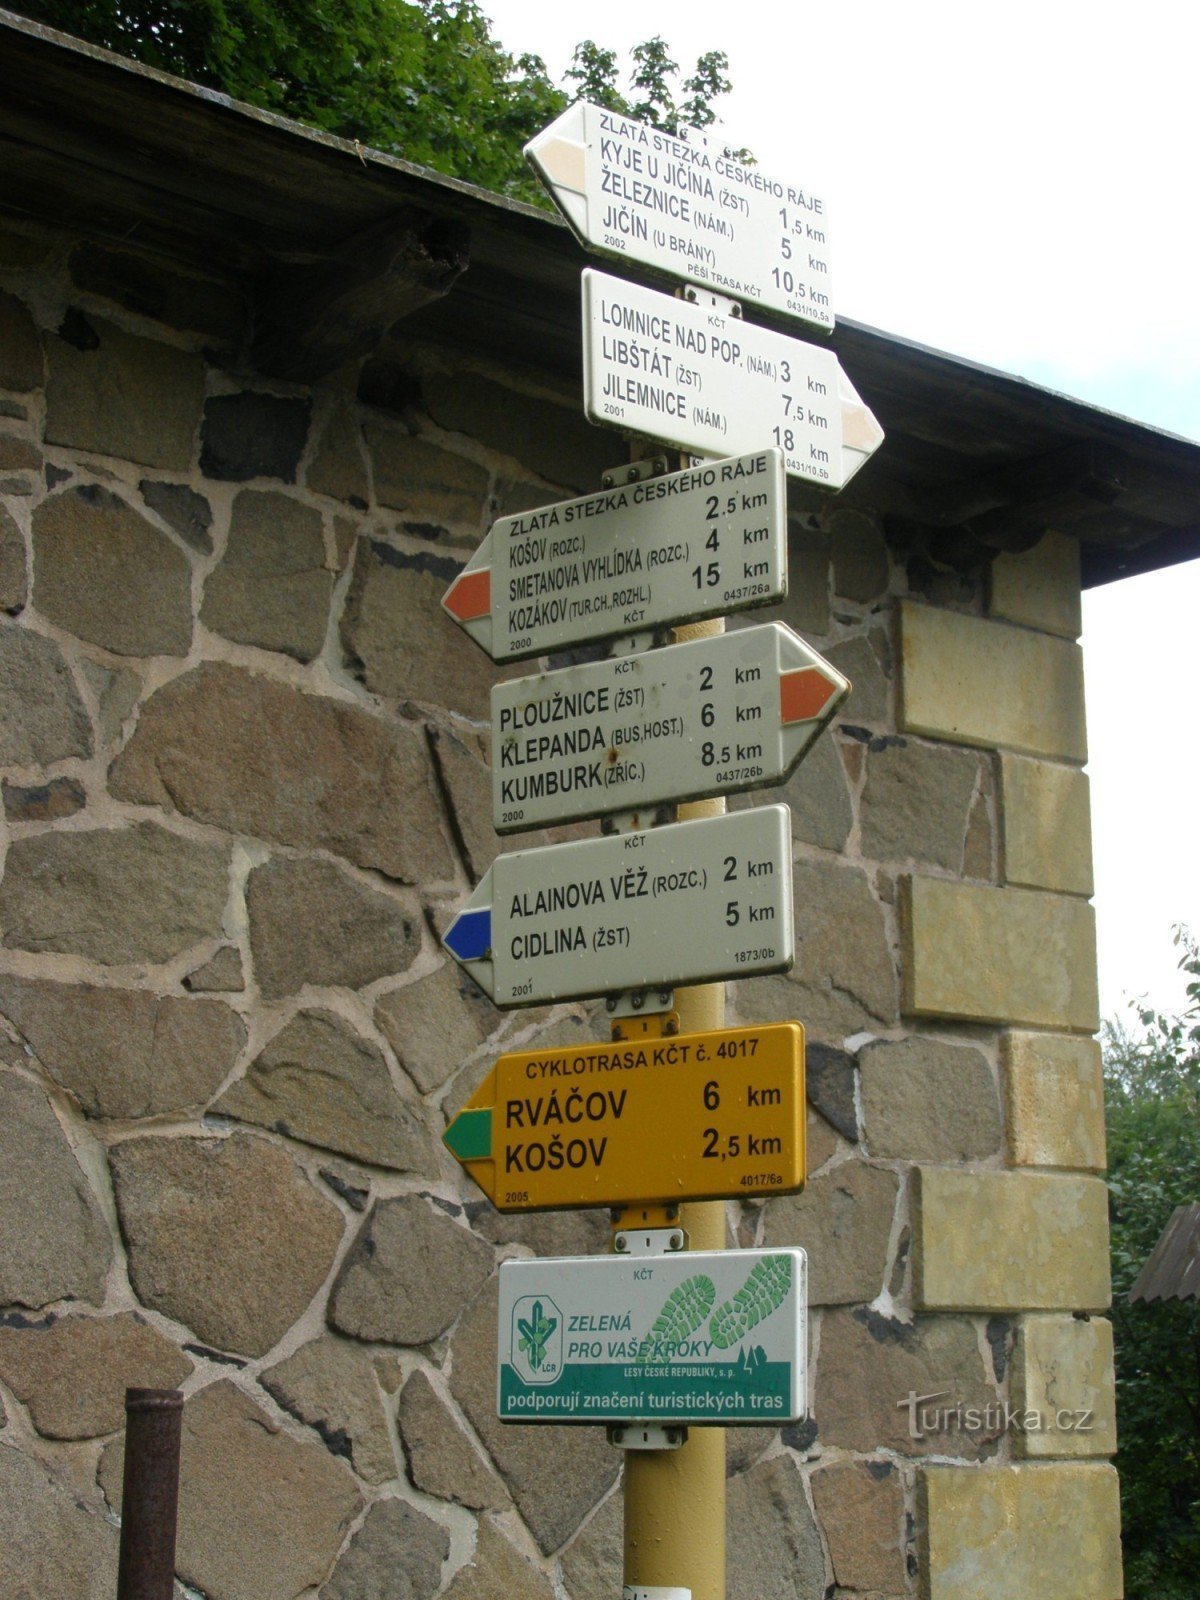 Tábor tourist crossroads - at the lookout tower